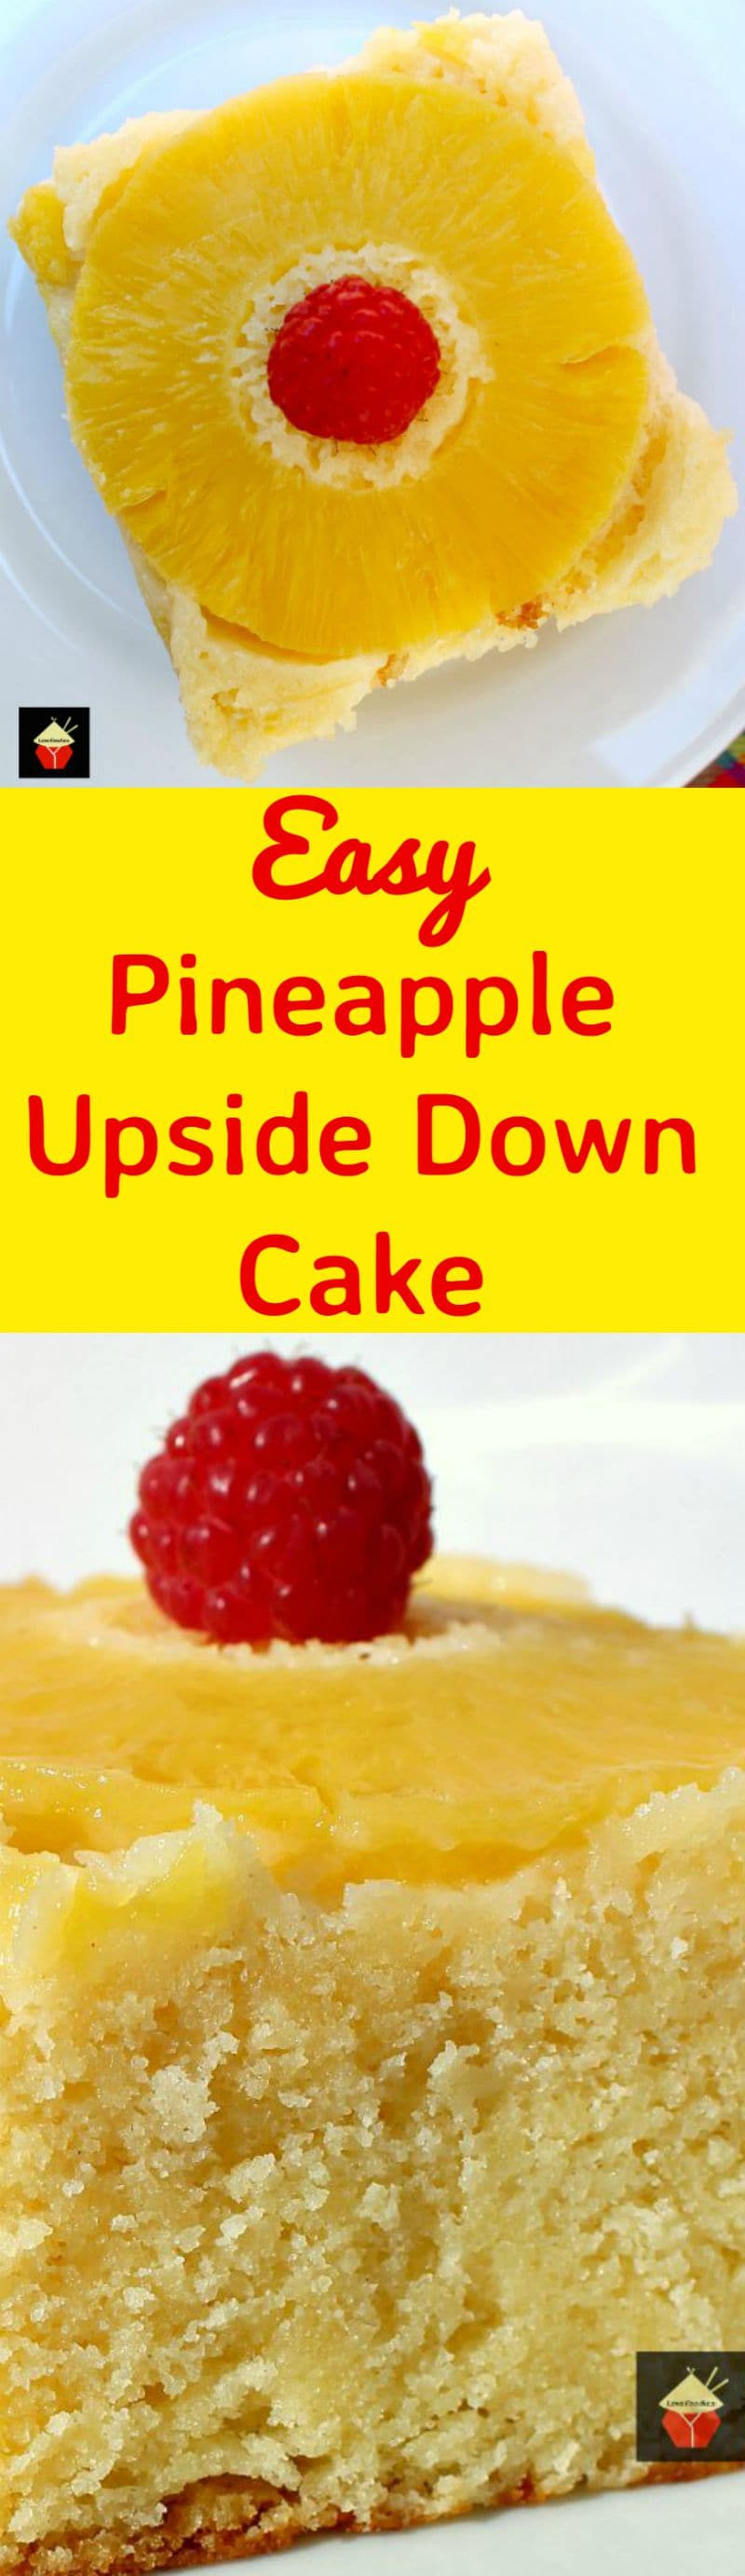 How To Make A Pineapple Upside Down Cake
 Easy Pineapple Upside Down Cake